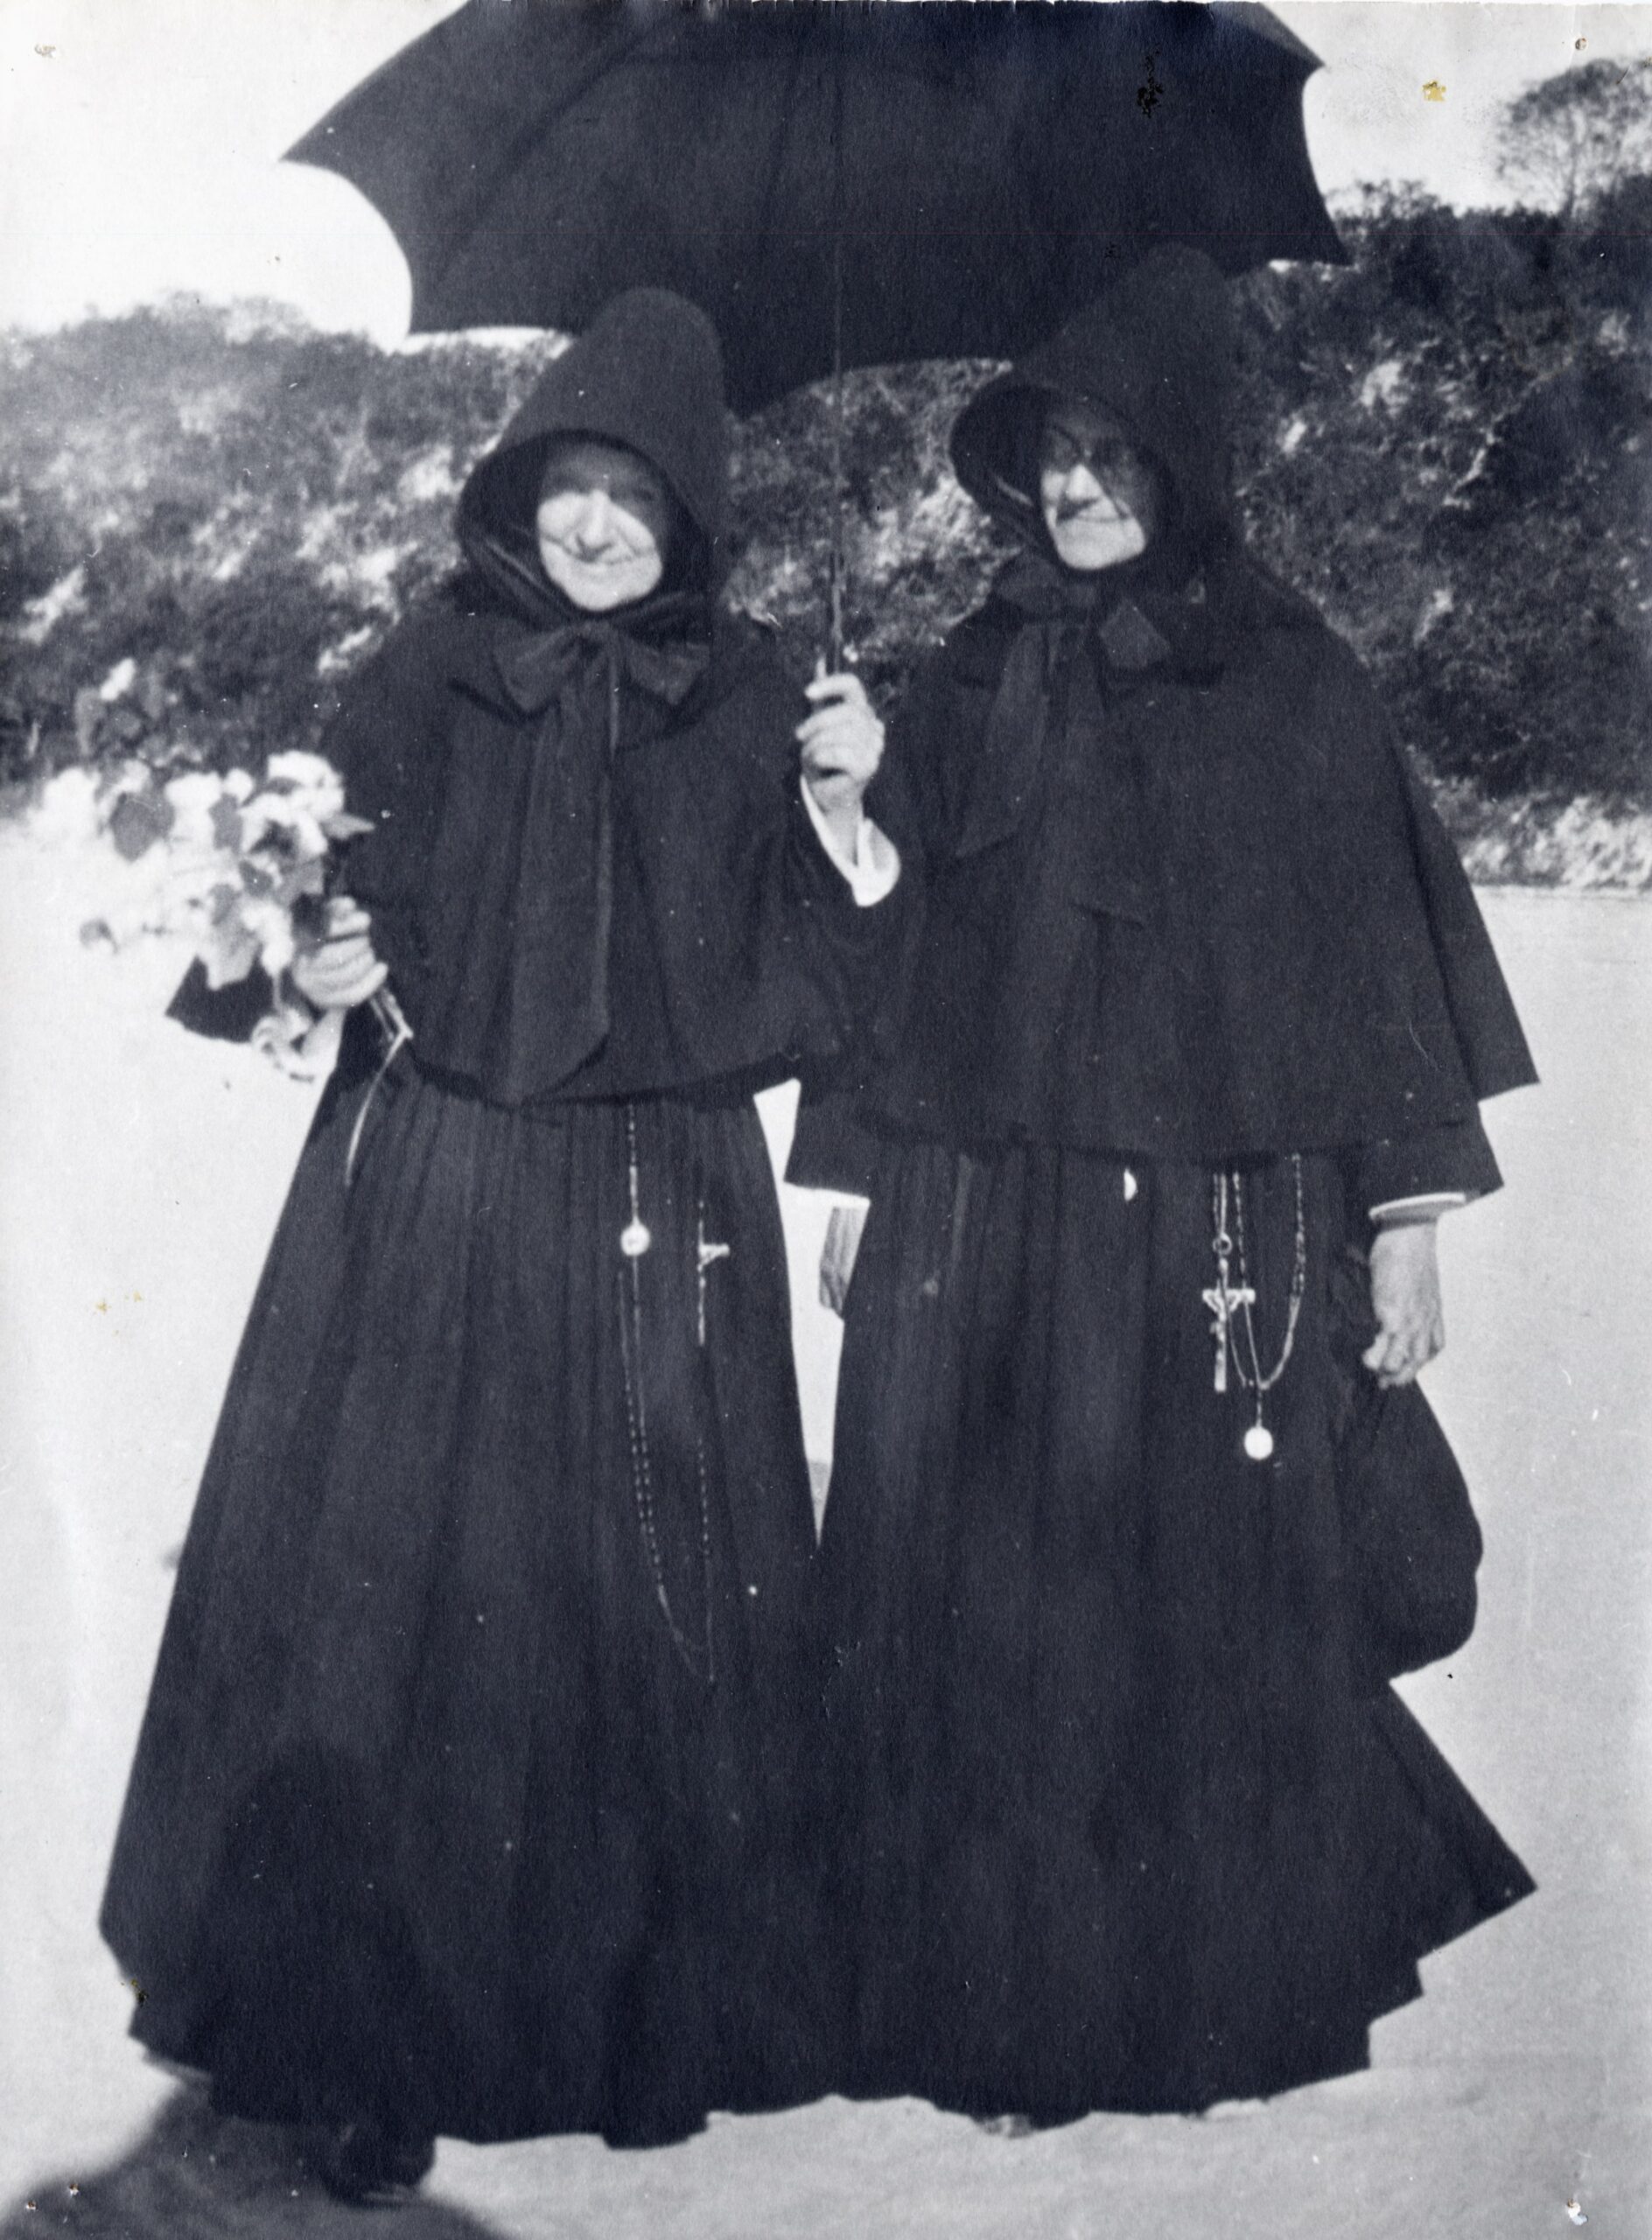 A historic photo of sisters from the Sisters of Charity of New York.